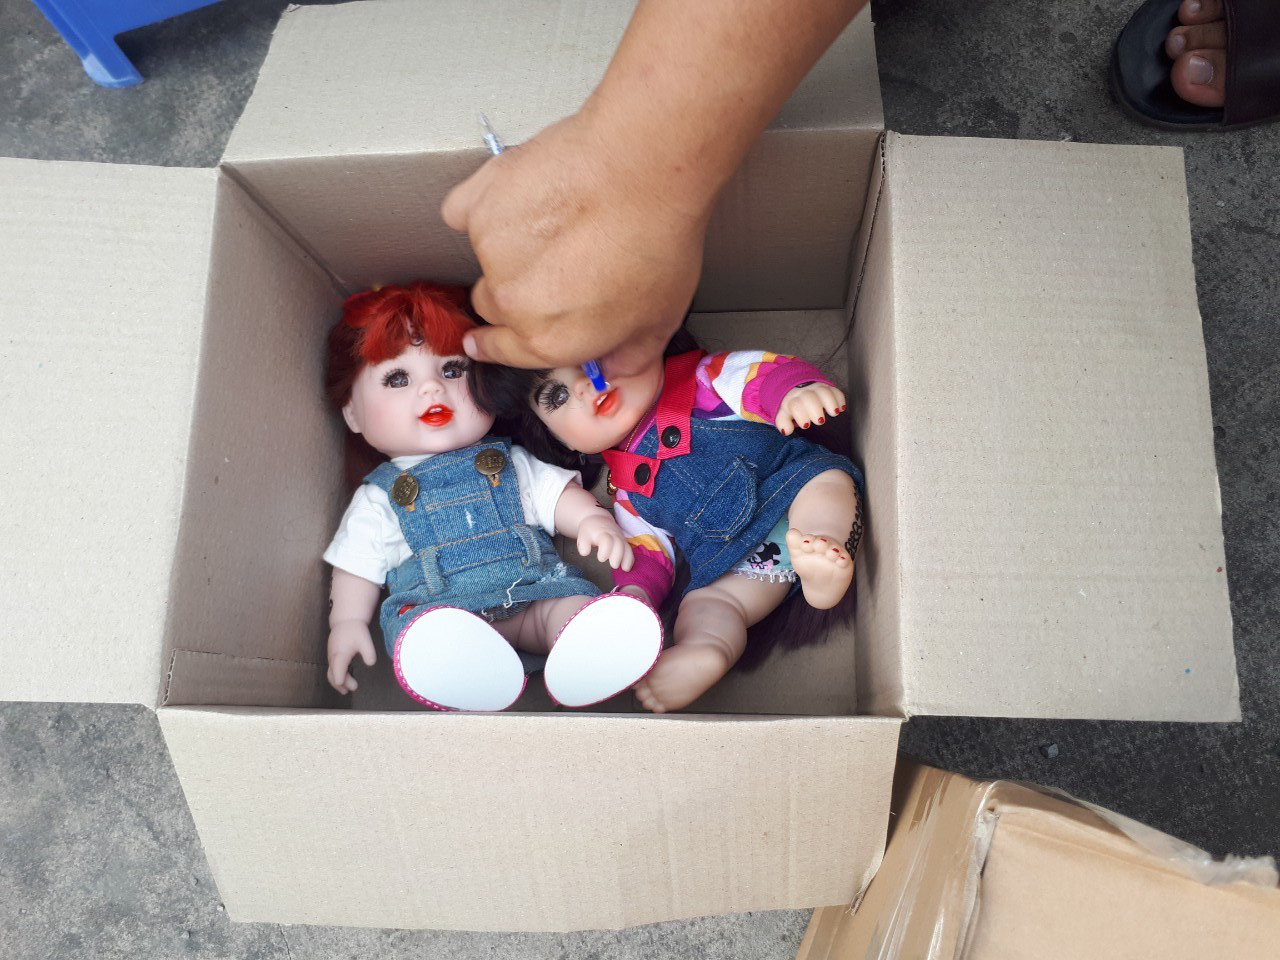 71 suspected Kuman Thong dolls discovered in Vietnam apartment